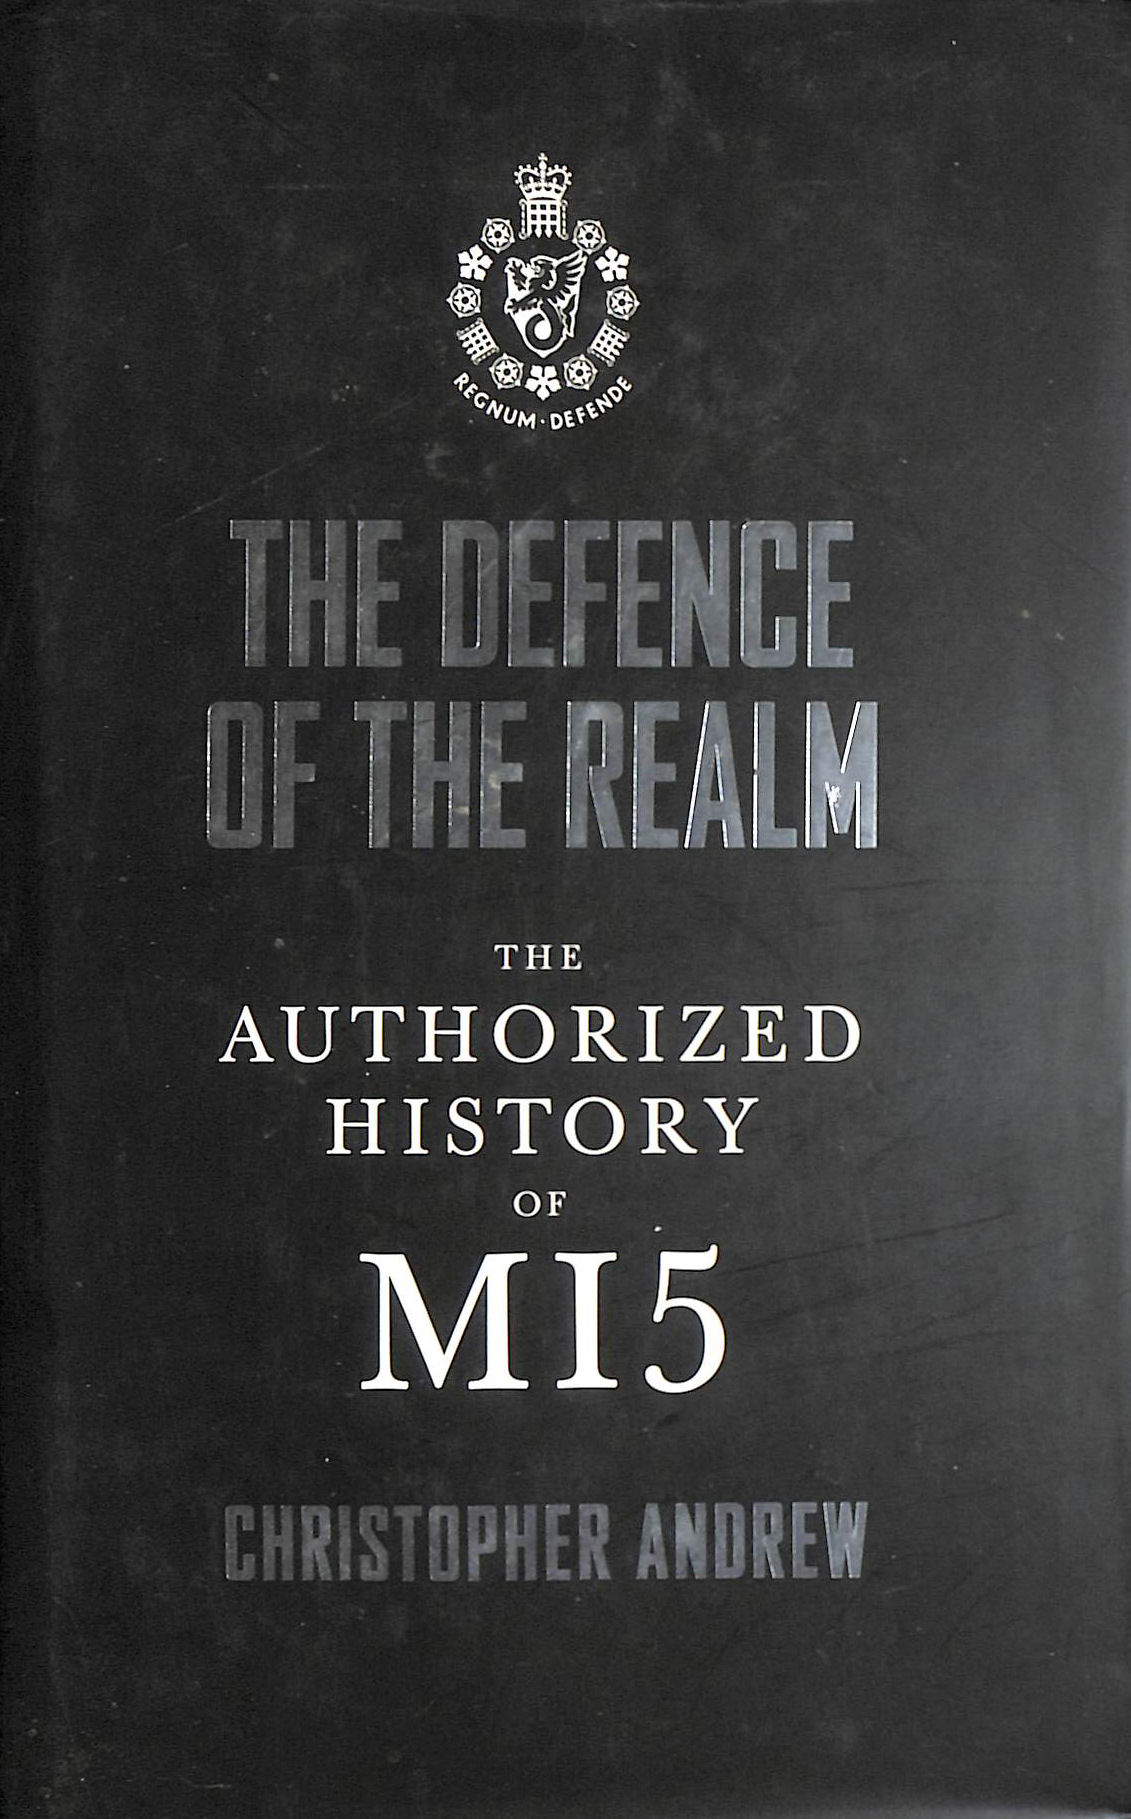 CHRISTOPHER ANDREW - The Defence of the Realm: The Authorized History of MI5